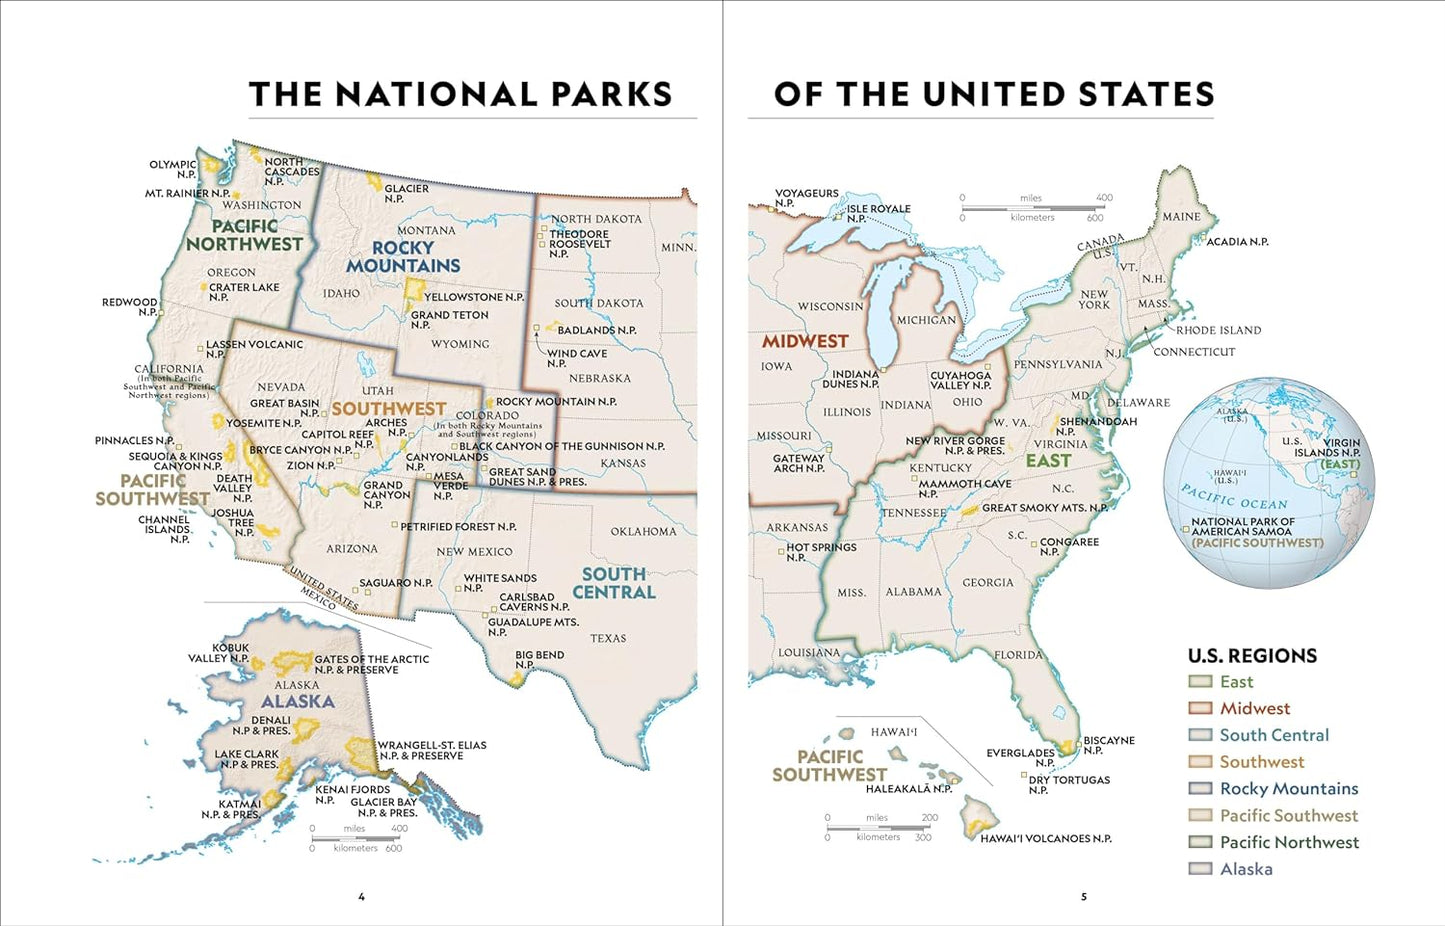 inside pages of book showing united states map of national parks.